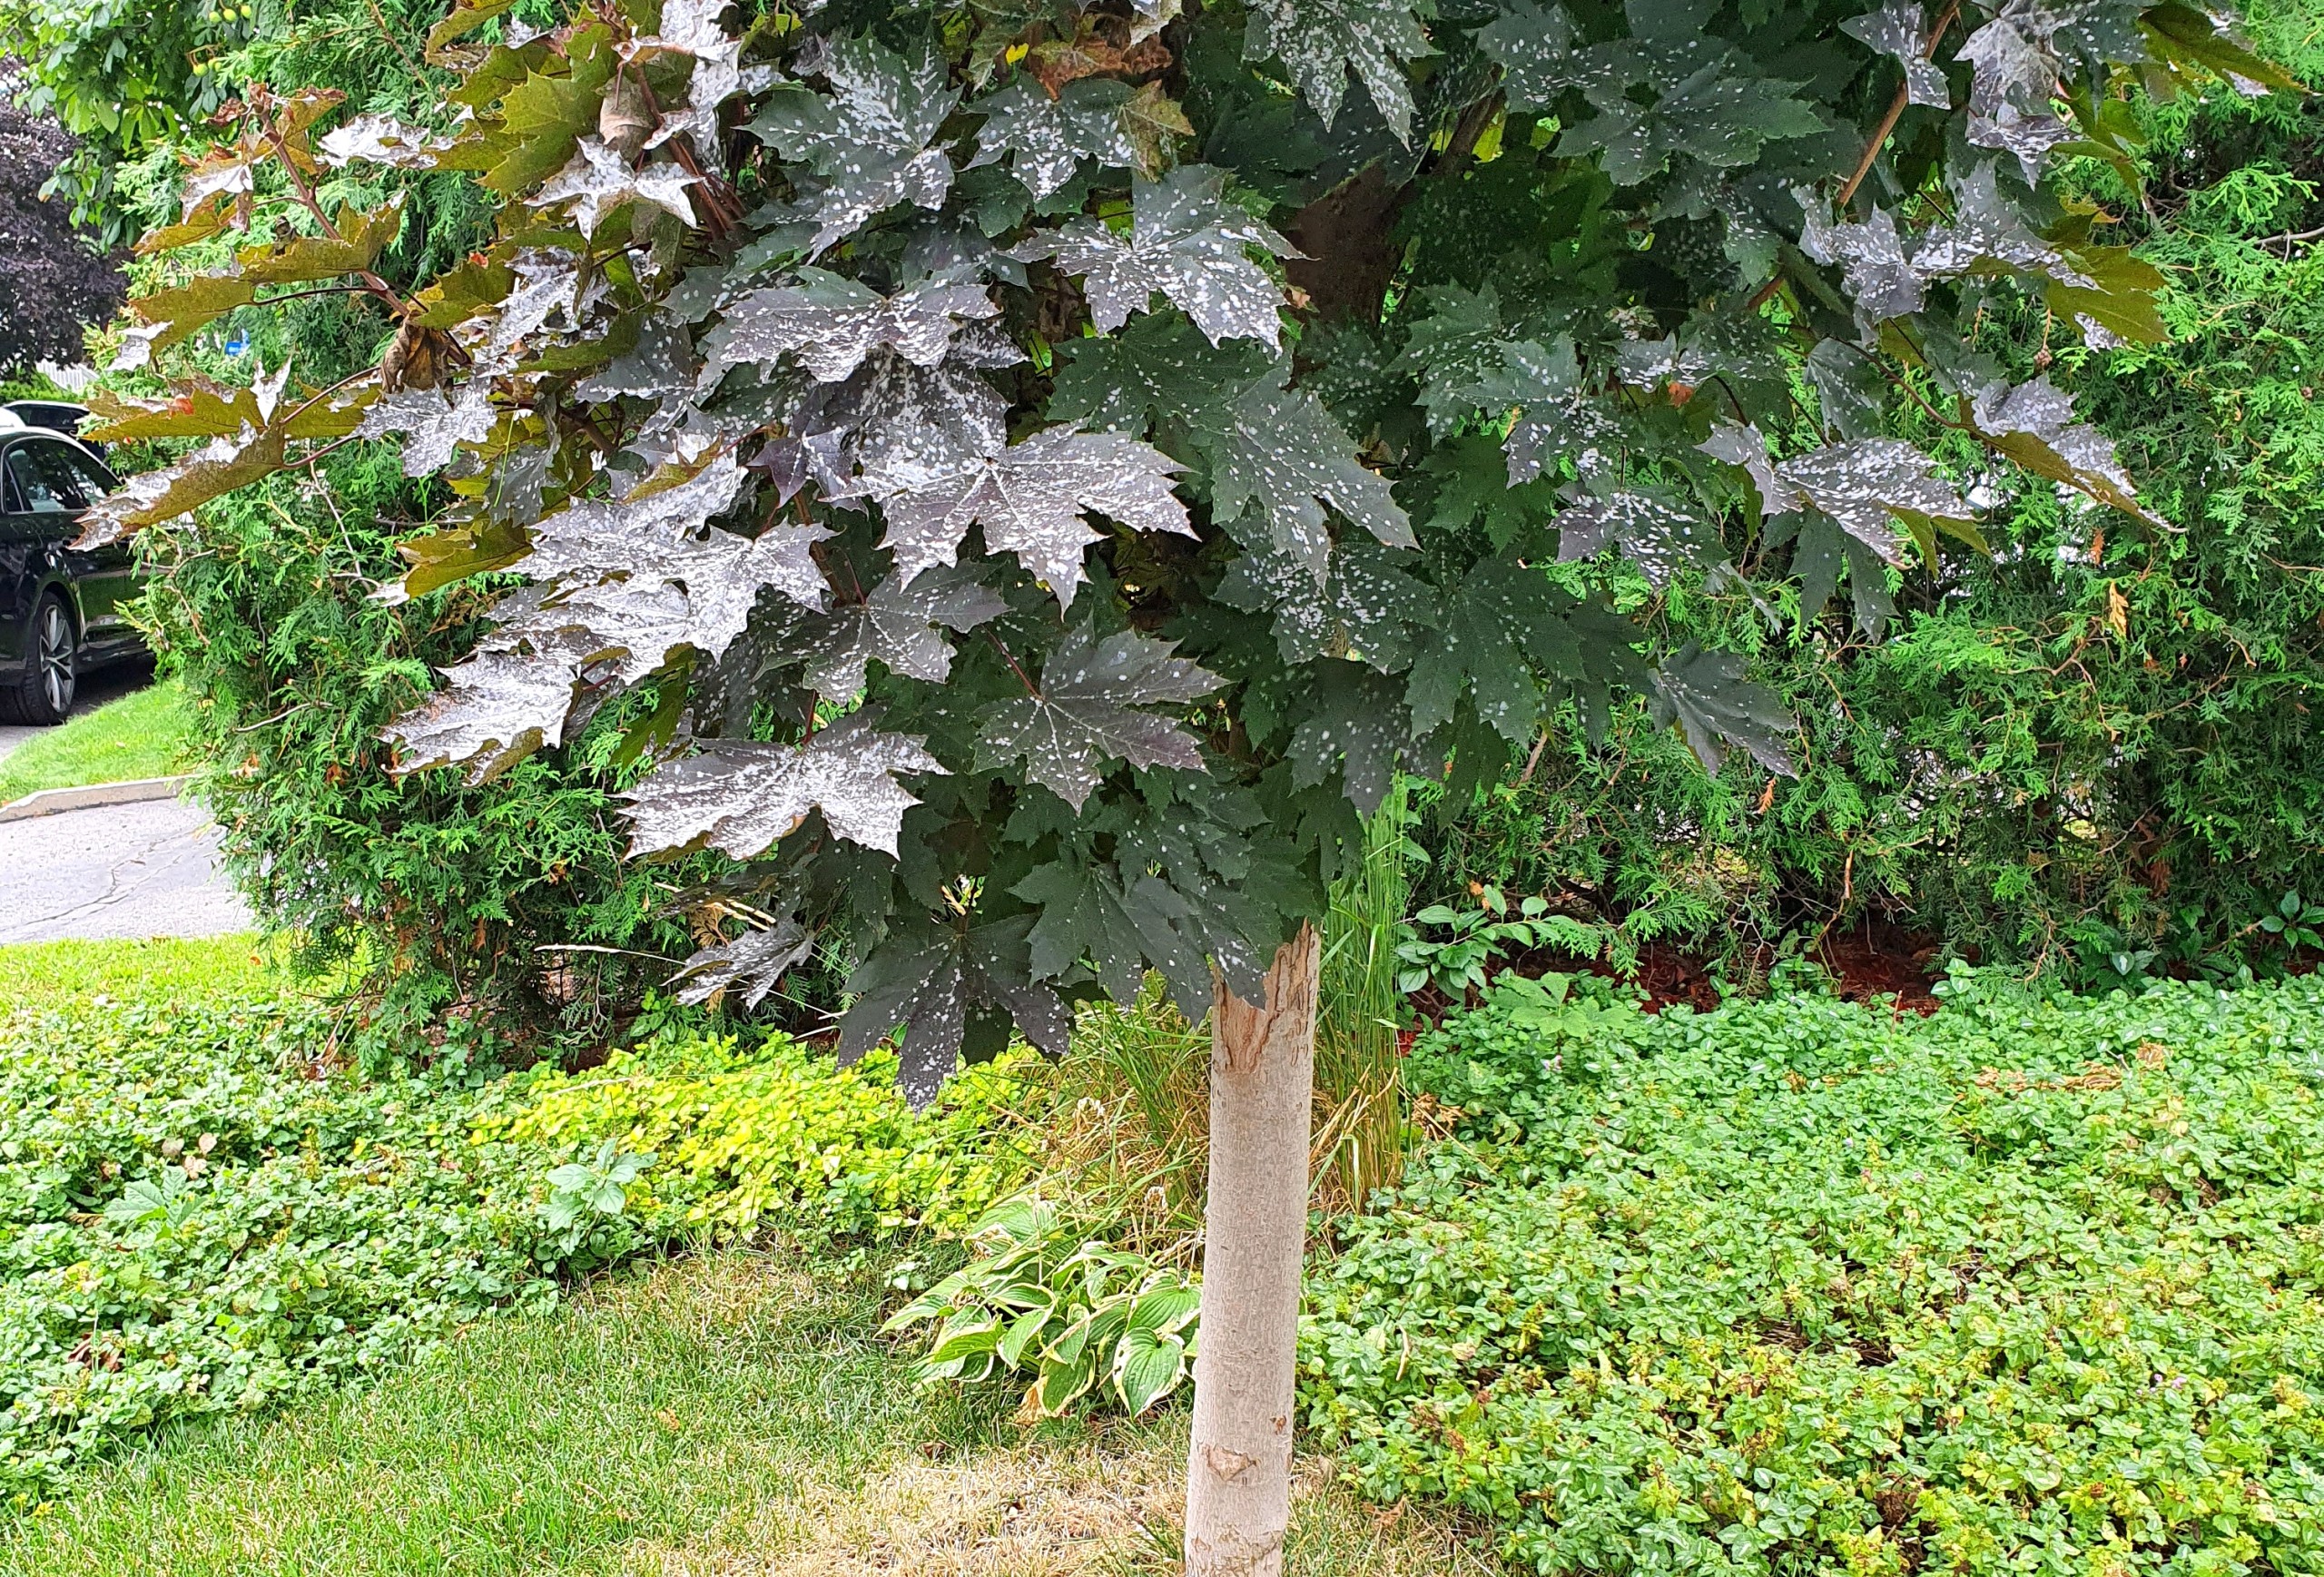 Red-leaved Norway maple with powdery mildew